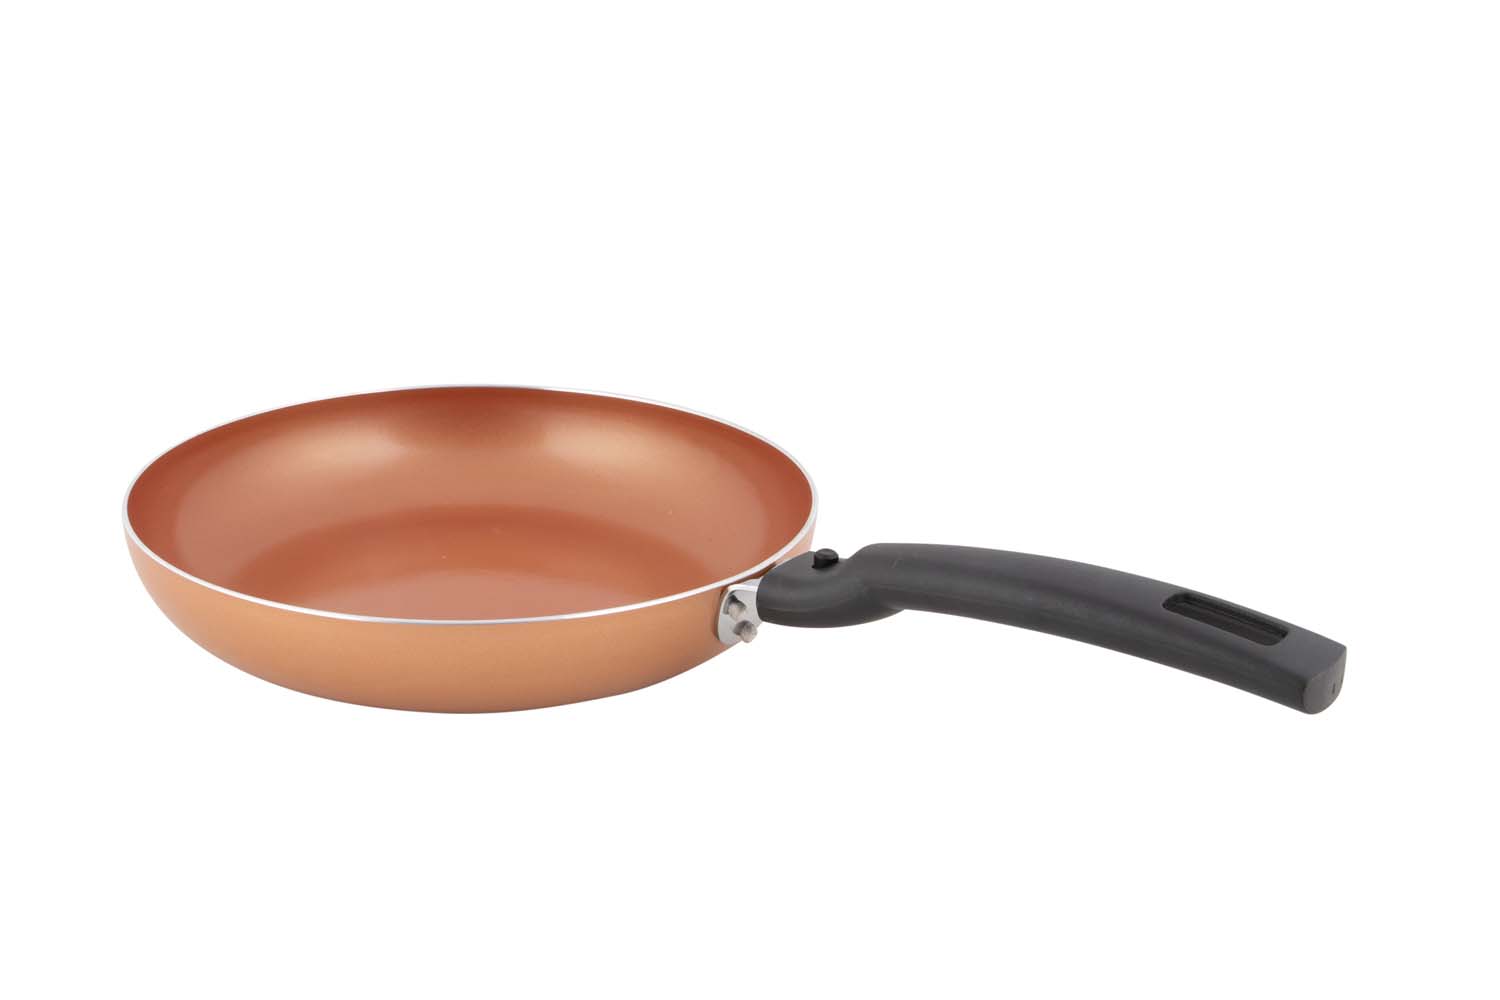 2304505 A compact and industrial frying pan with ceramic coating. This brons pan has a removable handle and is therefore space-saving. The ceramic coating prevents sticking, is scratch-resistant and easy to clean. It is also healthier cooking, because less fat is needed to bake. Can be used for gas, ceramic, electrical and induction heat sources. Thickness: 2.2 millimetre